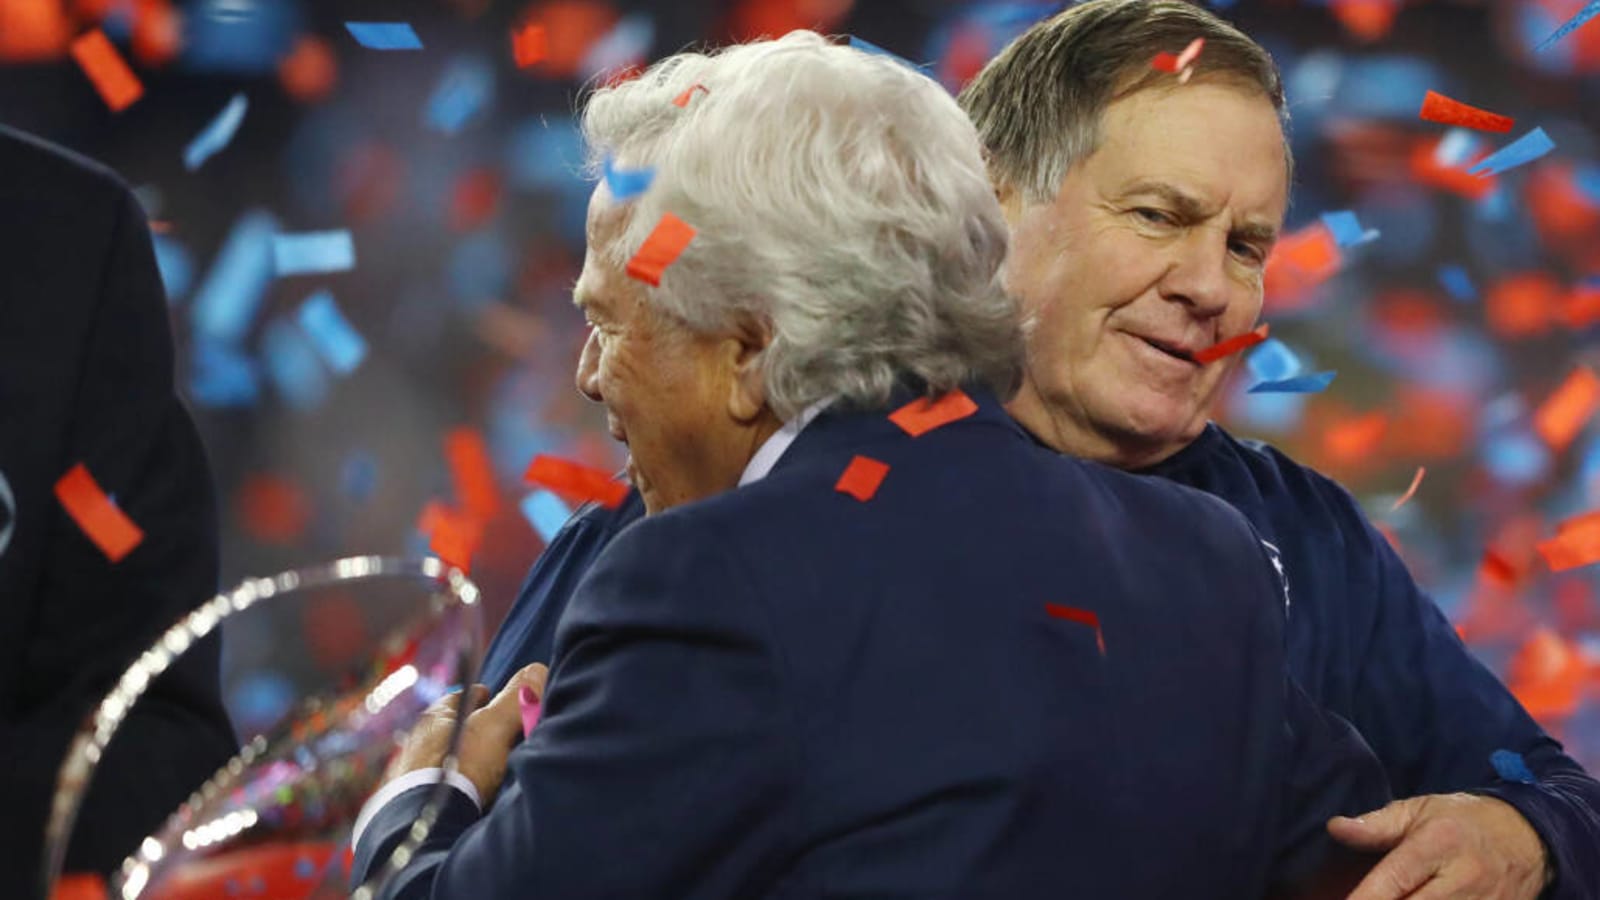 Biggest takeaways from latest ESPN report on former New England Patriots HC Bill Belichick